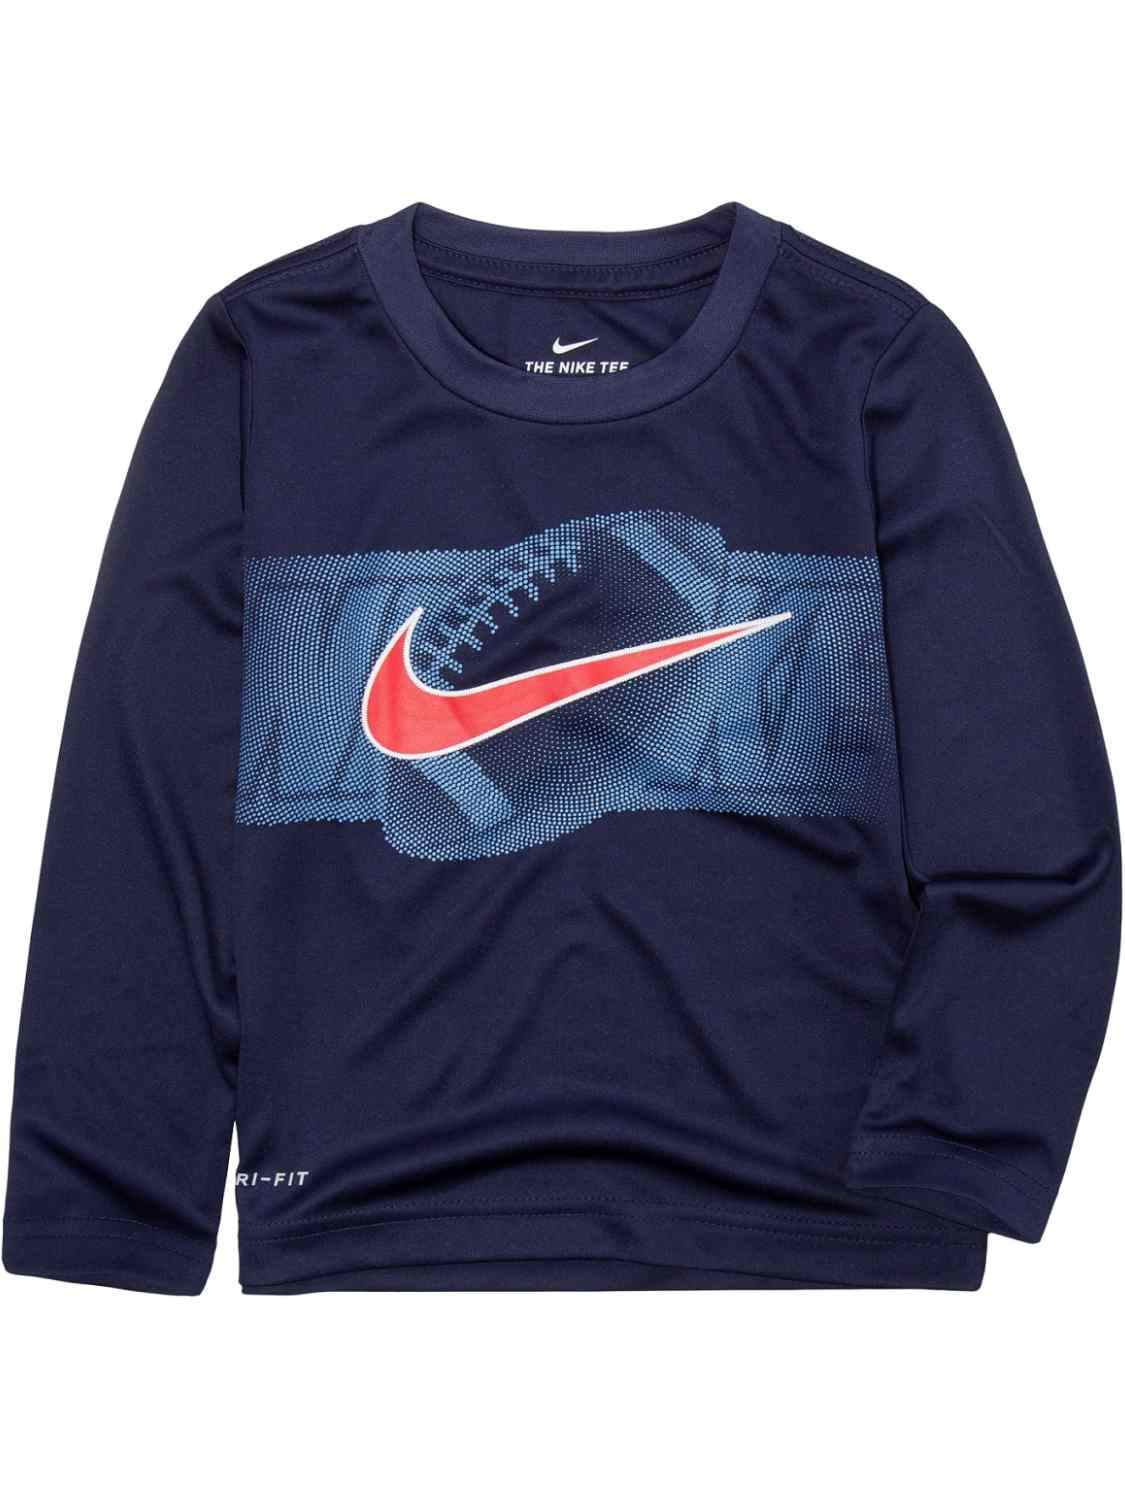 Buy > 5t nike outfits boy > in stock